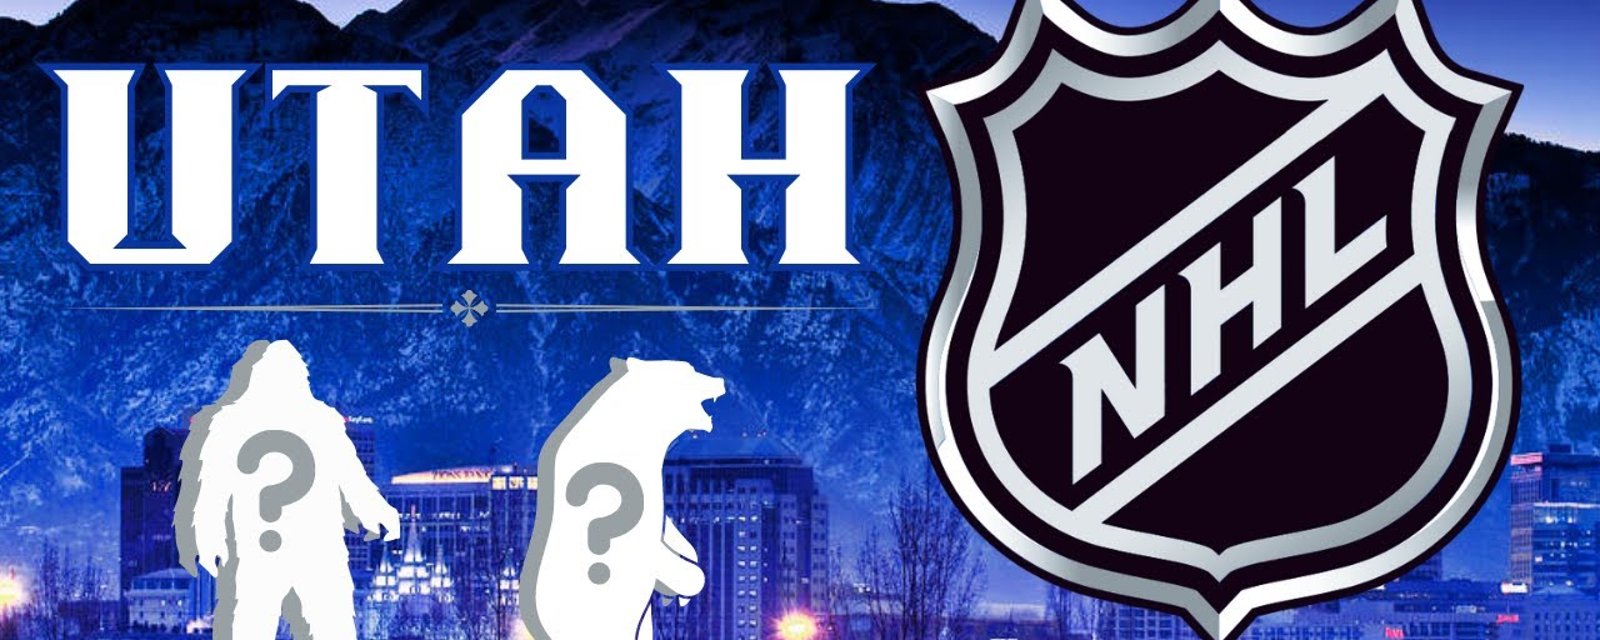 Utah group reveals survey to name NHL team and some suggestions are eye-popping! 